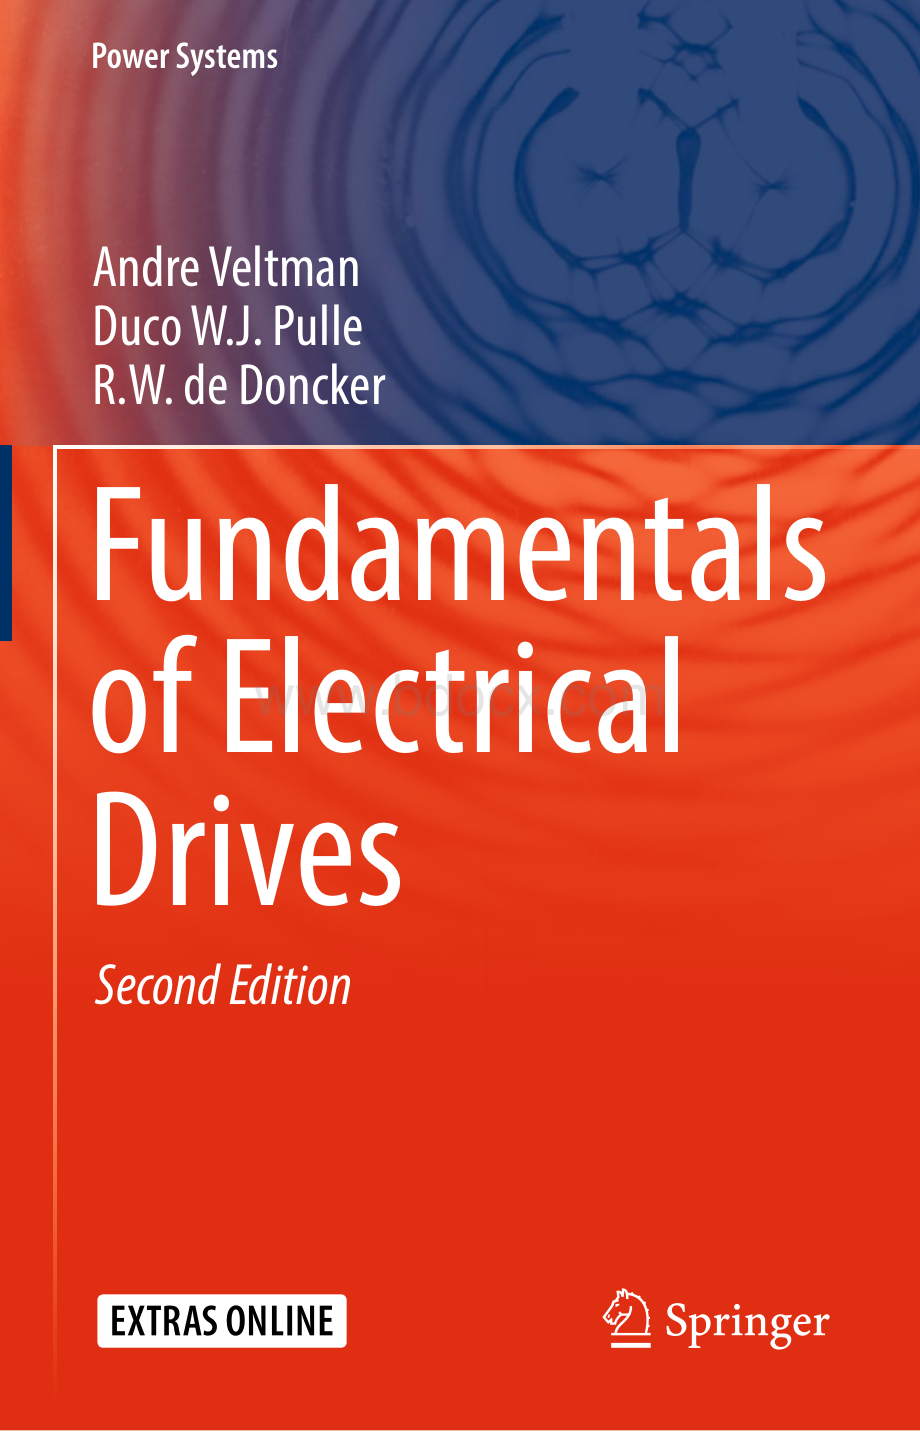 Fundamentals of Electrical Drives, Second Edition.pdf_第1页